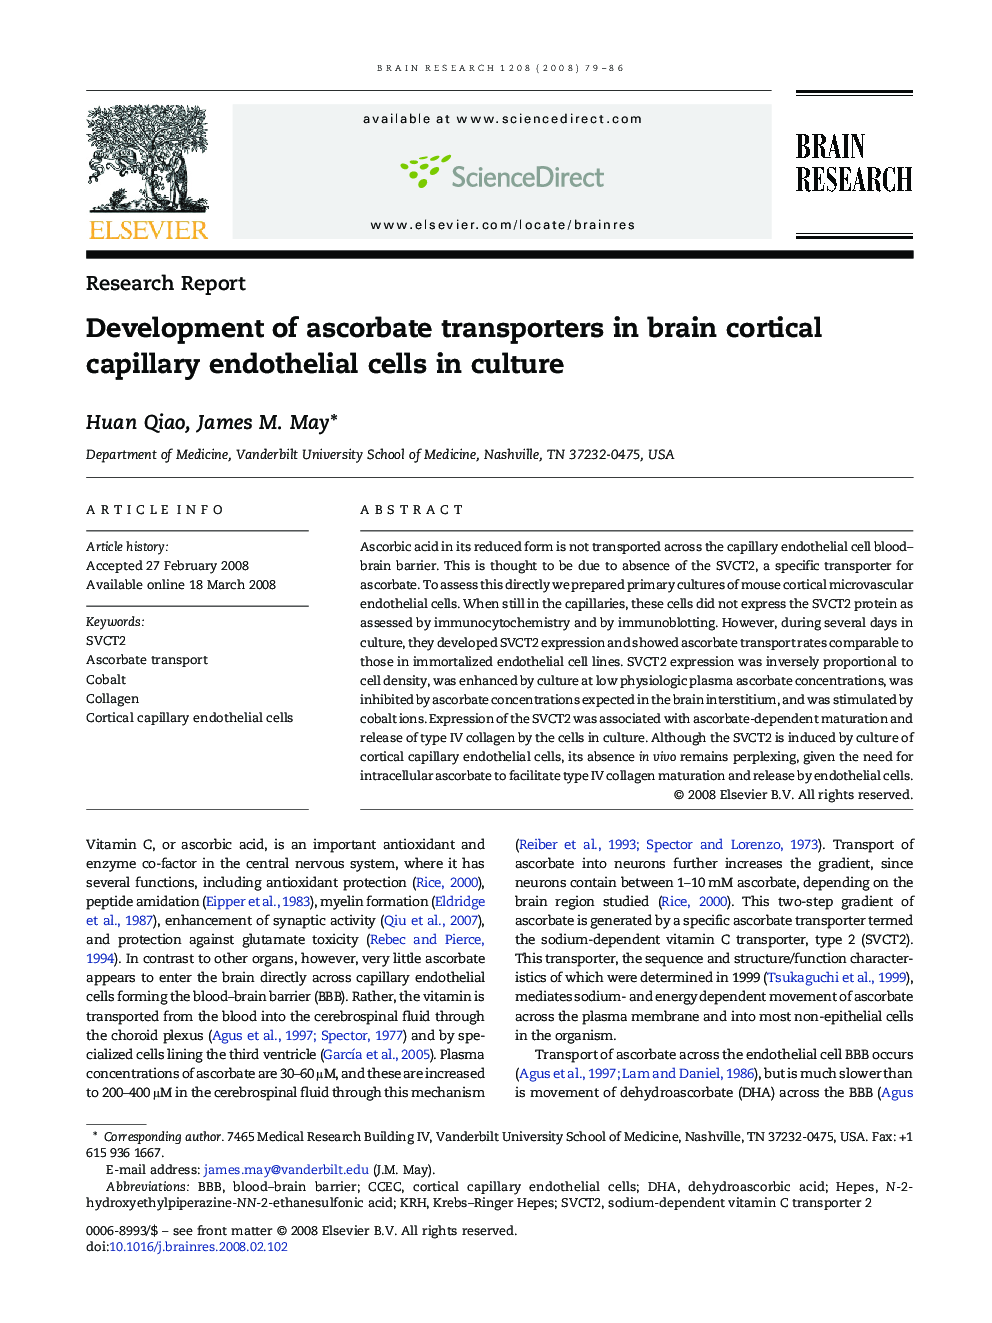 Development of ascorbate transporters in brain cortical capillary endothelial cells in culture